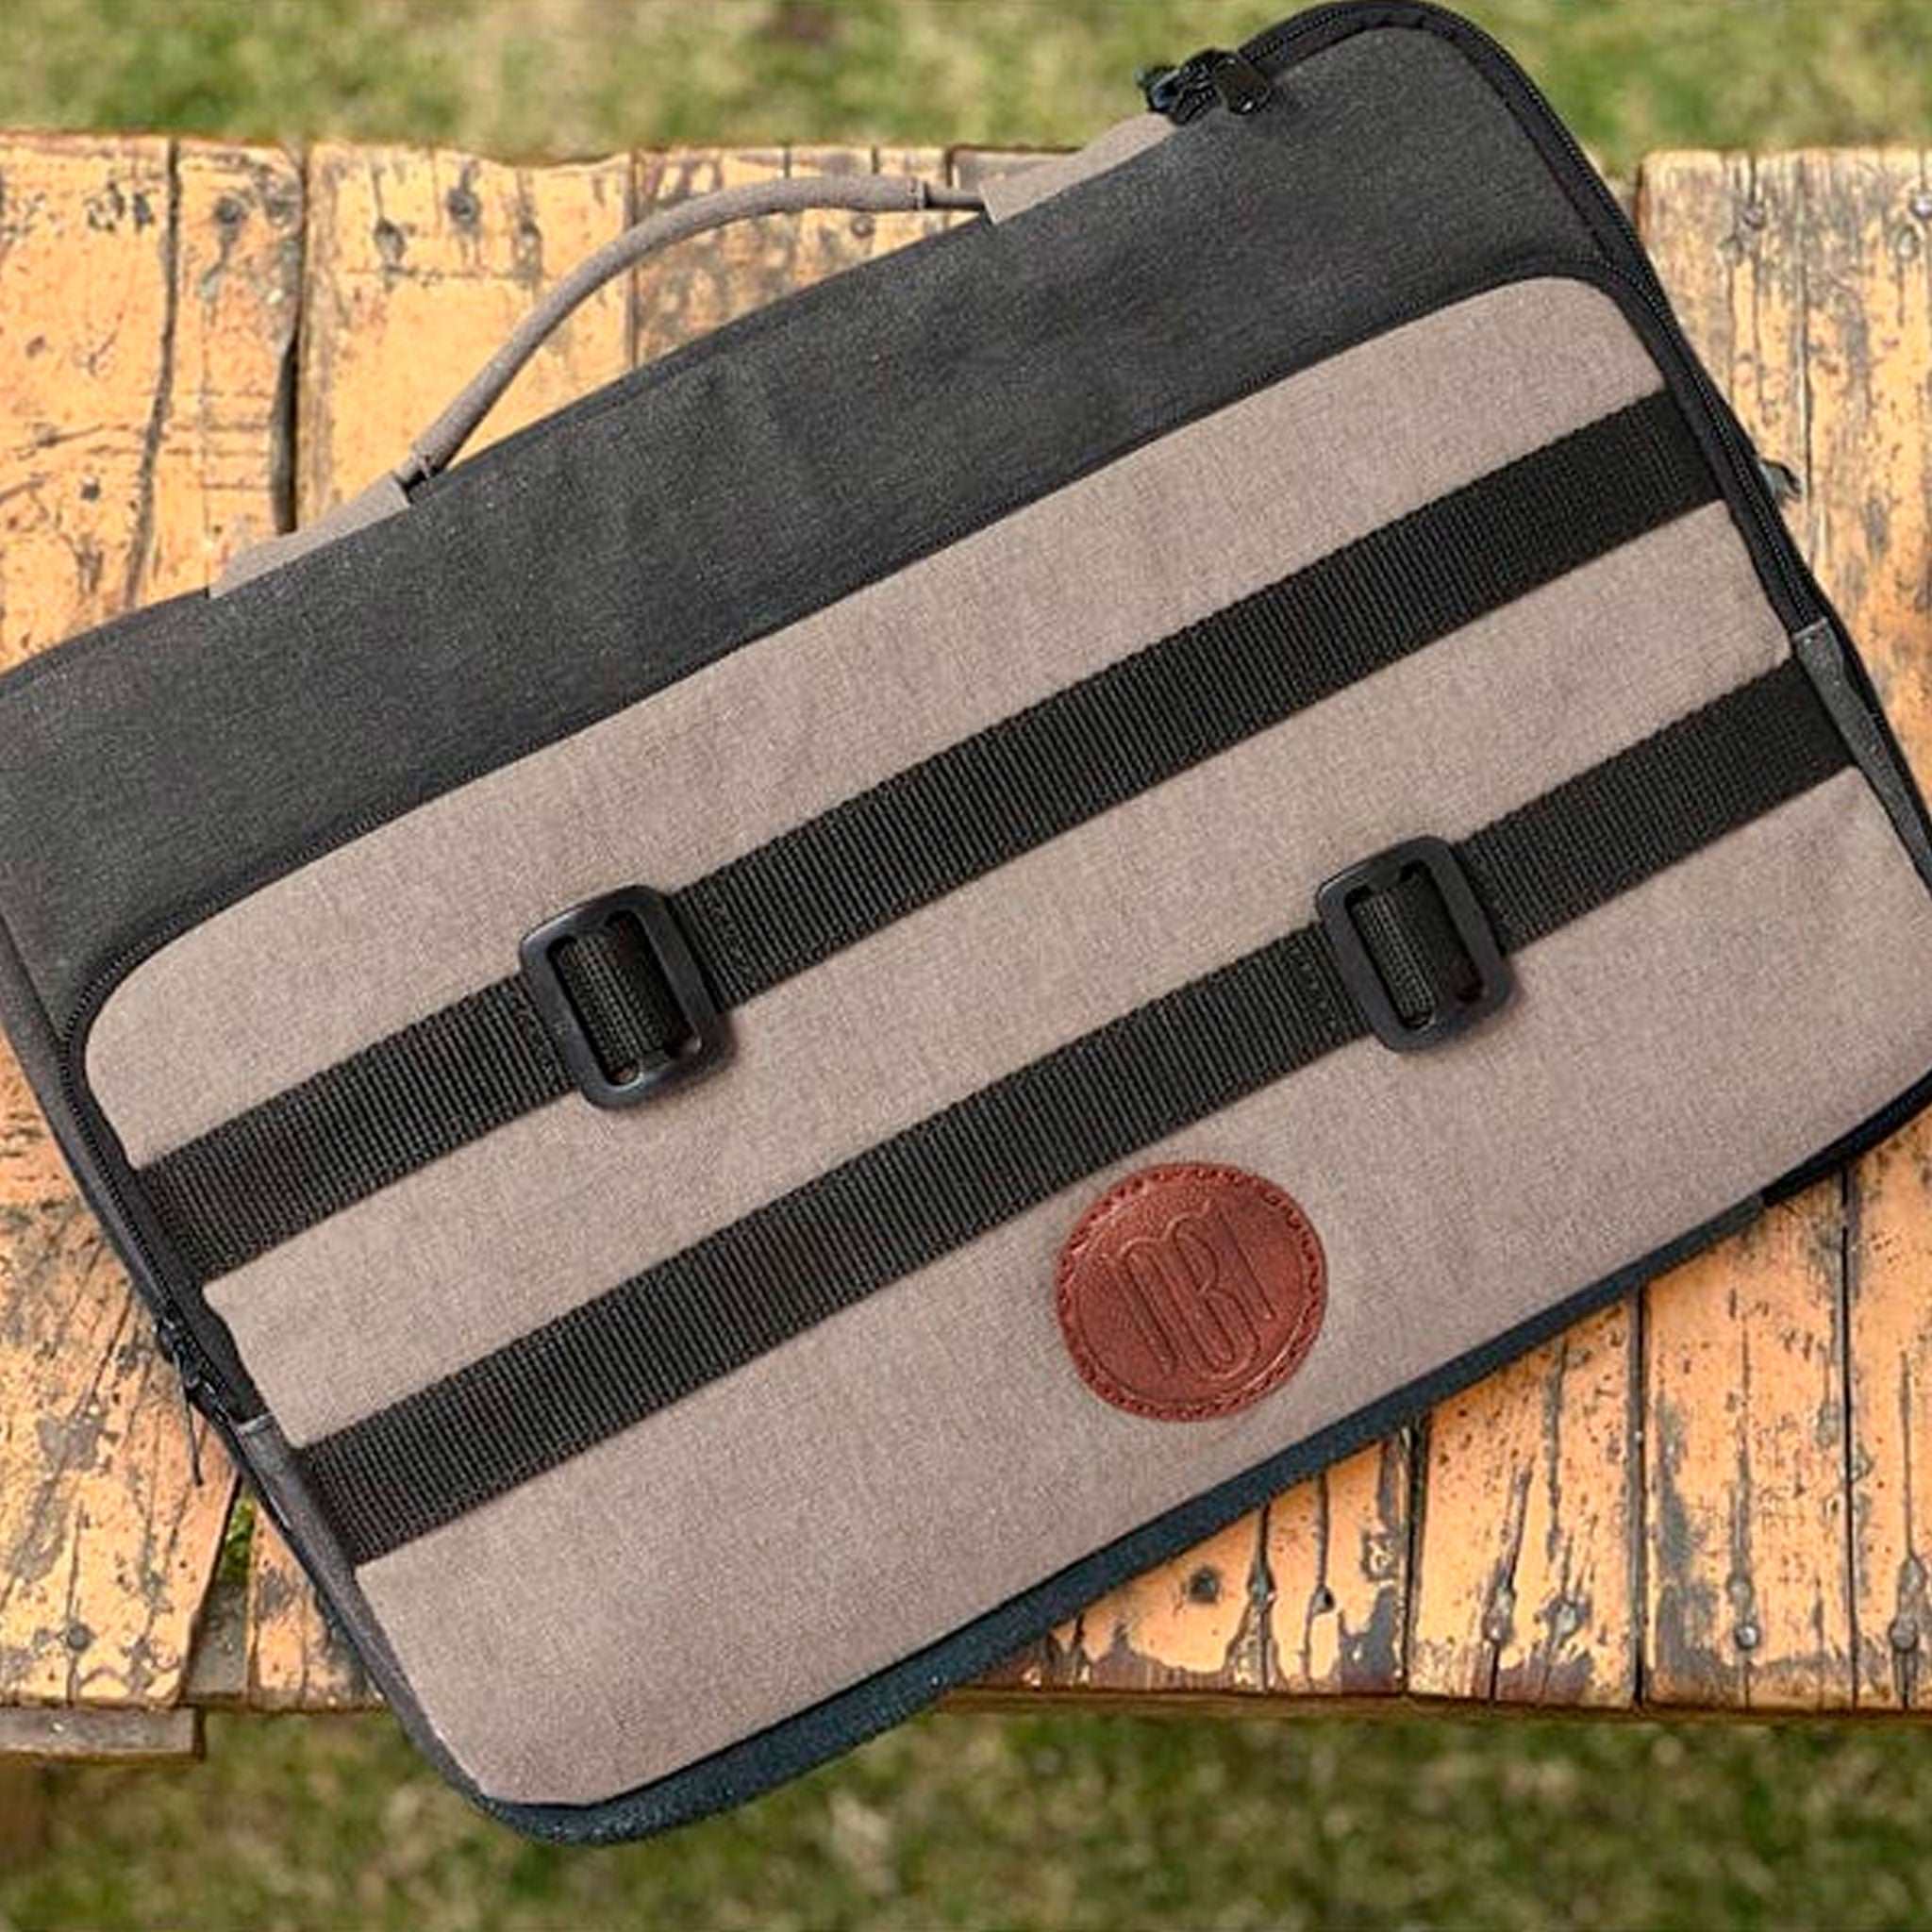 Mona B Essentials Laptop Bag Sleeve Case Cover Pouch with Handle for 14 Inch Laptop for Men & Women, Padded Laptop Compartment, Premium Zipper Closure, Water Repellent Canvas Fabric: Dylan